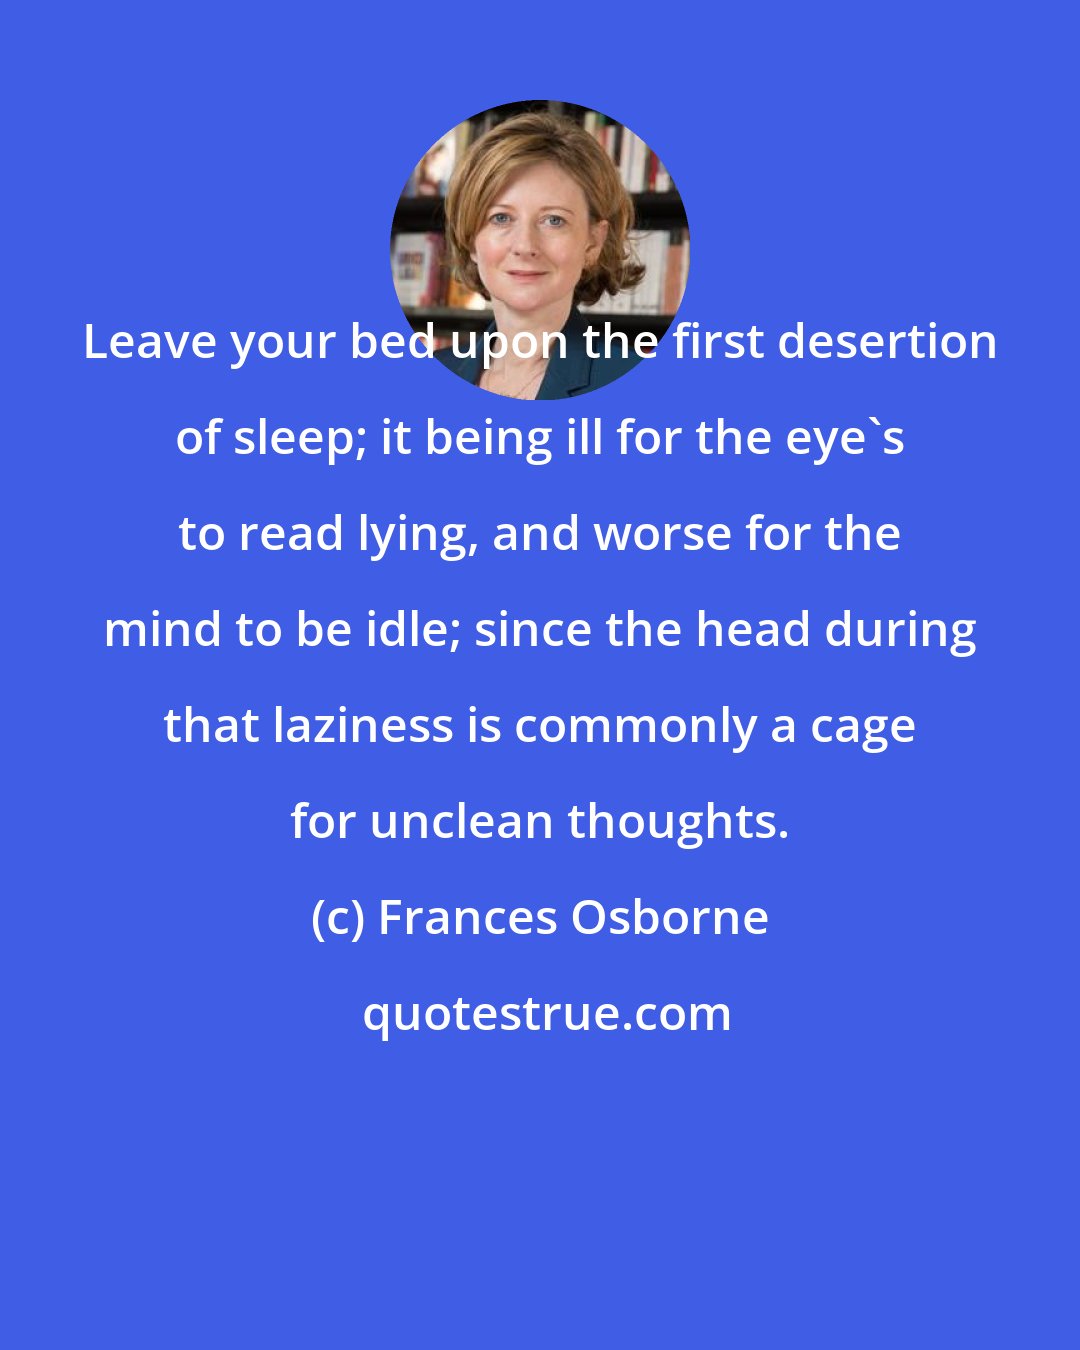 Frances Osborne: Leave your bed upon the first desertion of sleep; it being ill for the eye's to read lying, and worse for the mind to be idle; since the head during that laziness is commonly a cage for unclean thoughts.